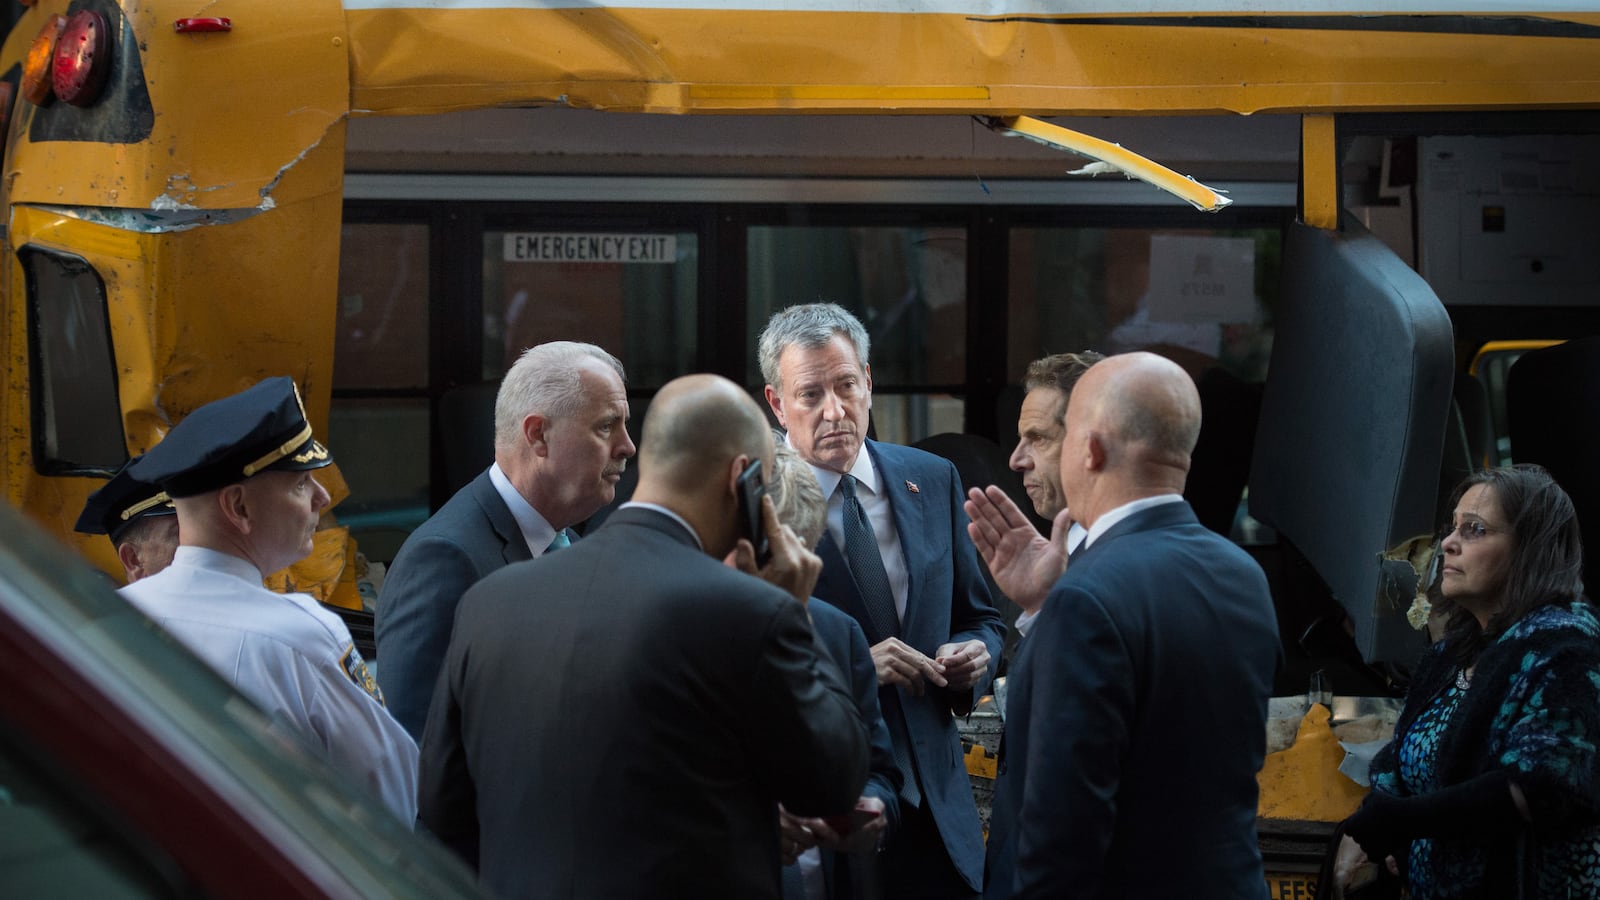 Mayor Bill de Blasio and Governor Andrew Cuomo stand in front of the school bus mangled in Tuesday's attack.